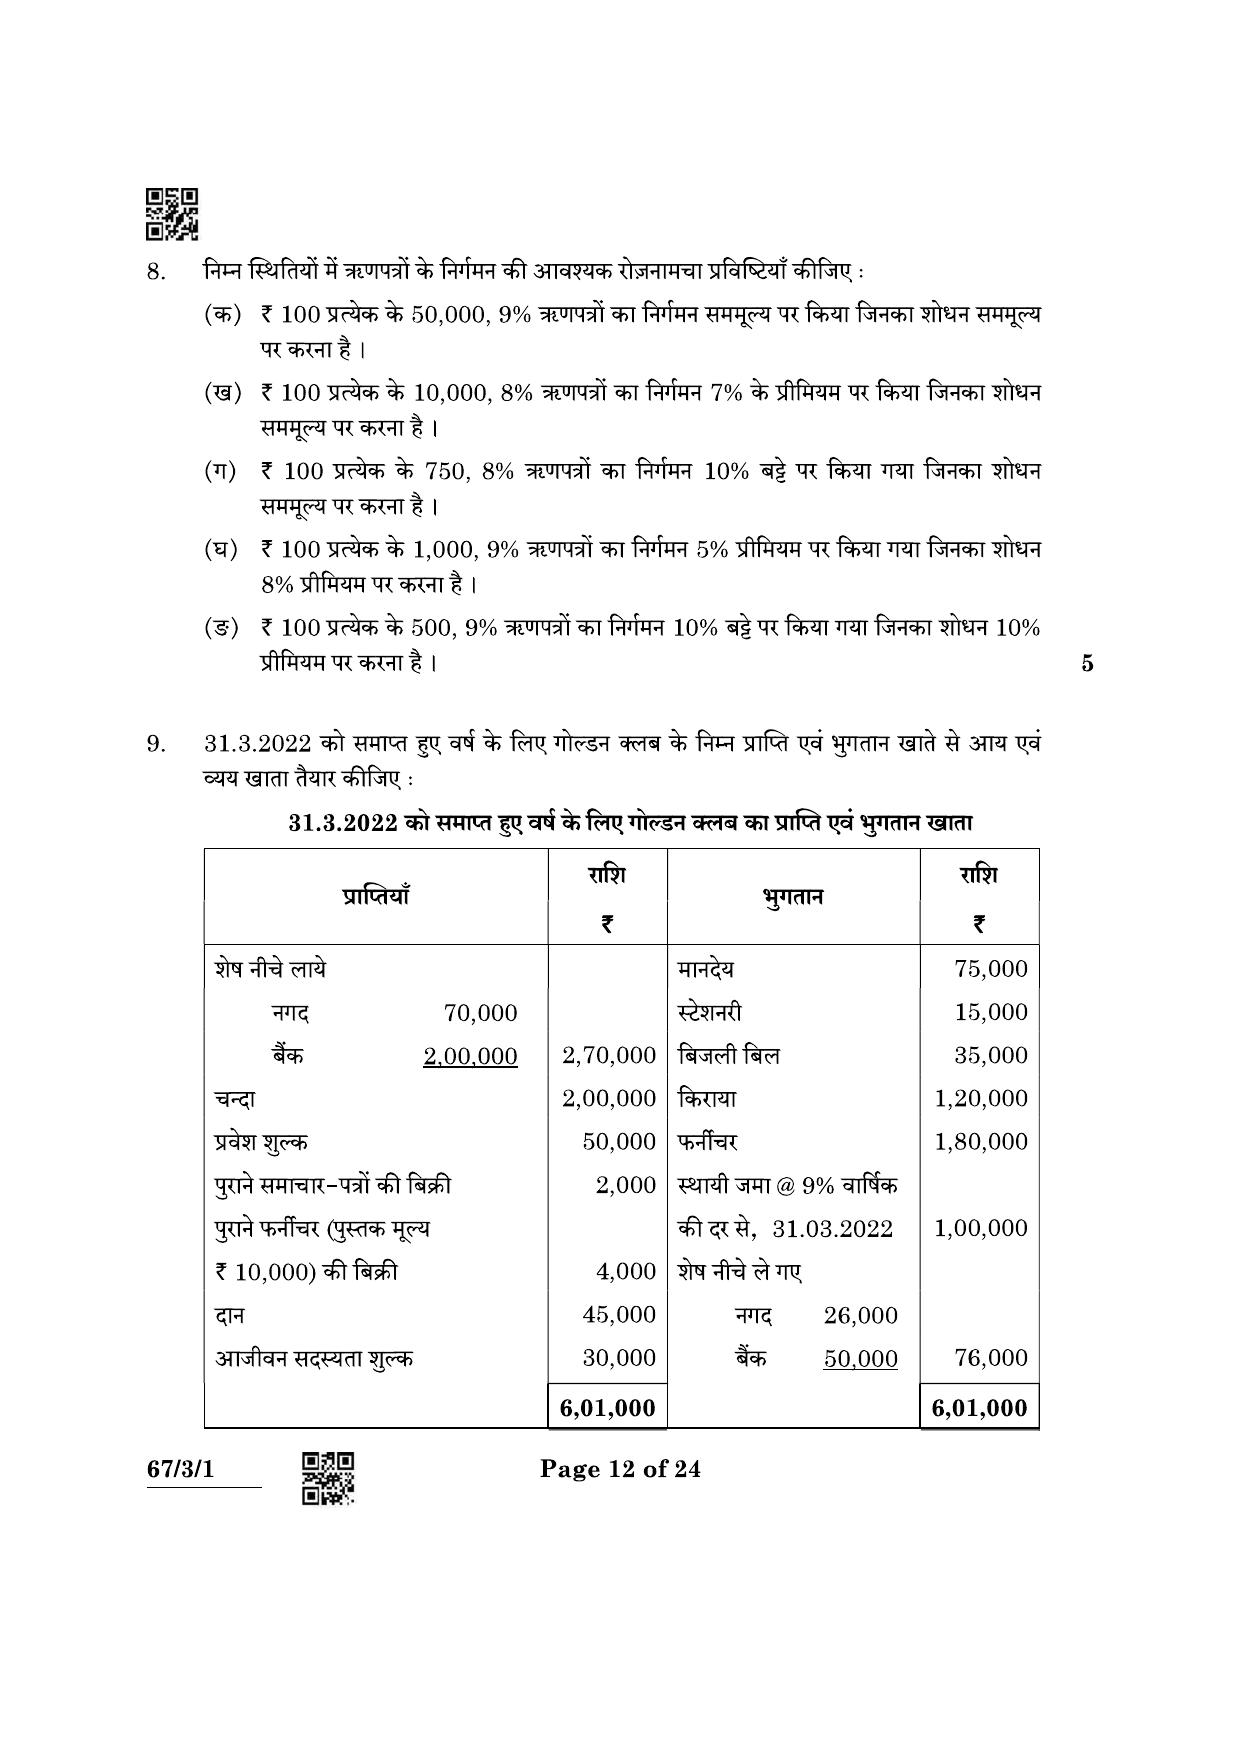 CBSE Class 12 67-3-1 Accountancy 2022 Question Paper - Page 12